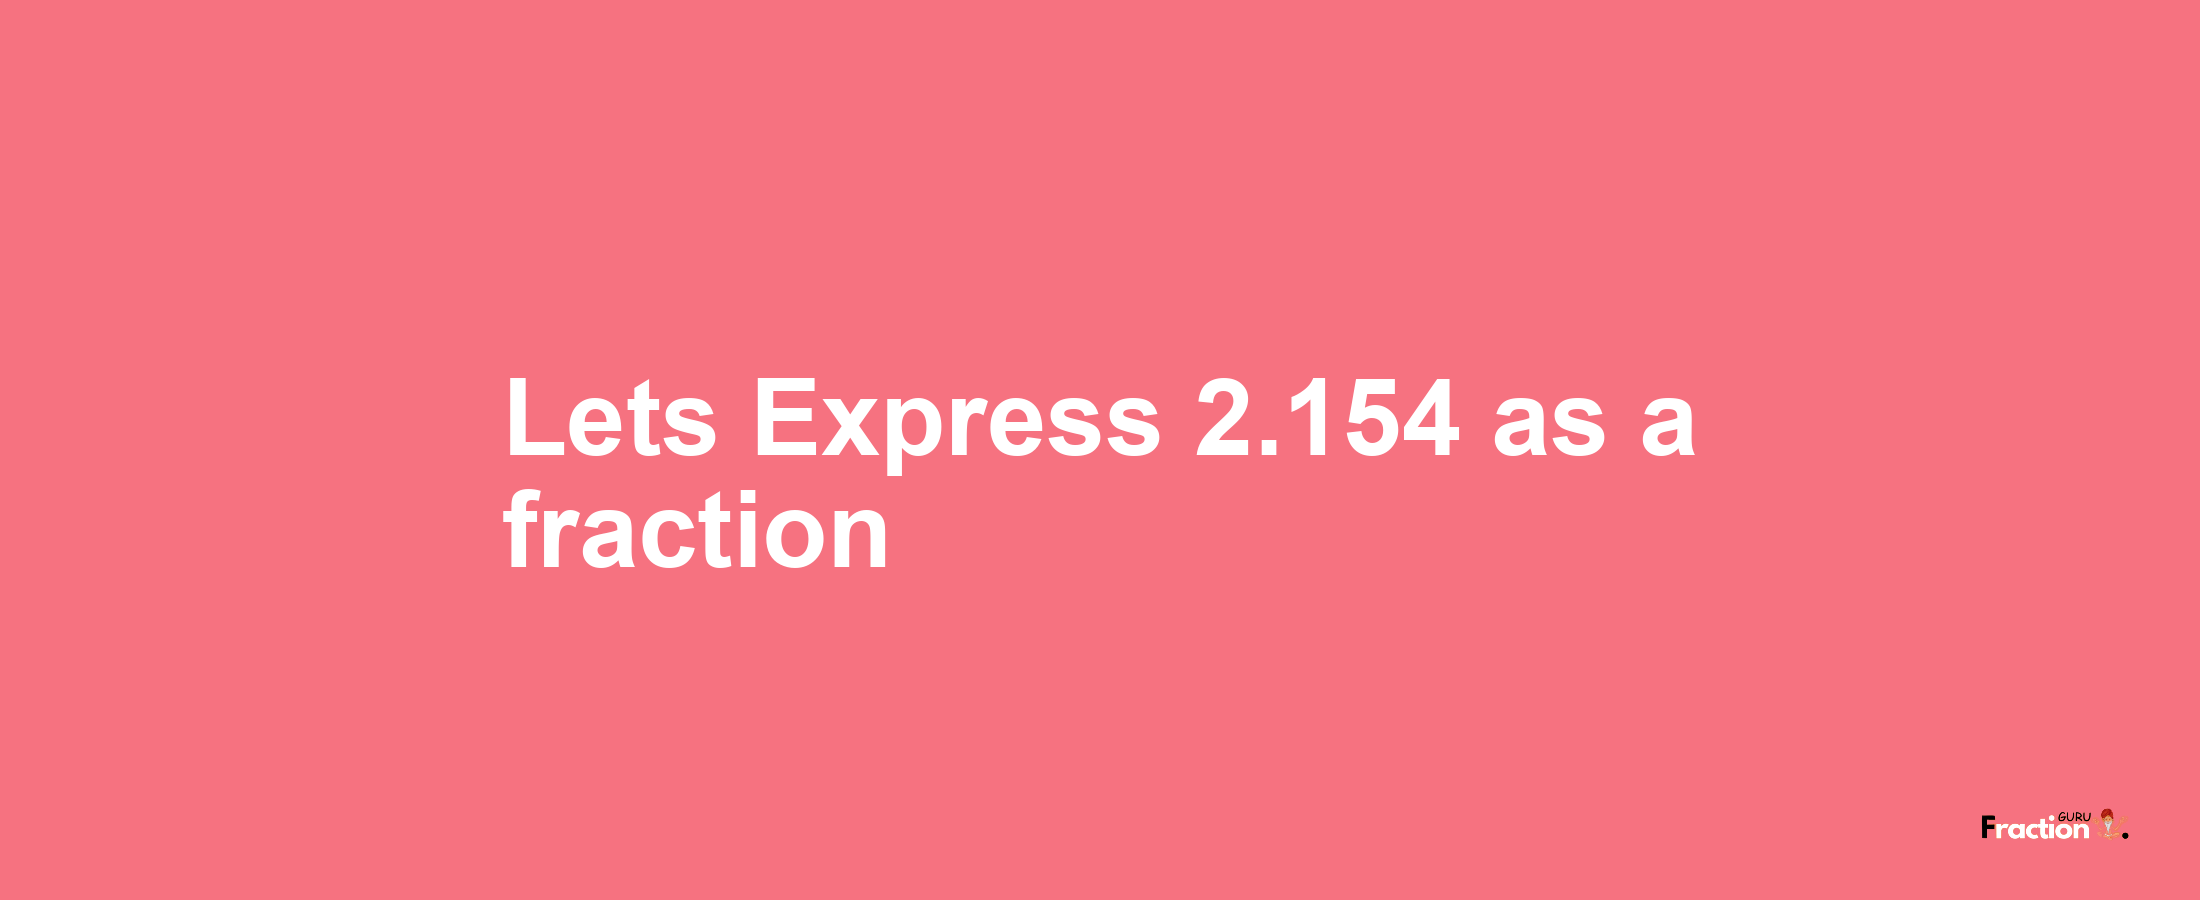 Lets Express 2.154 as afraction